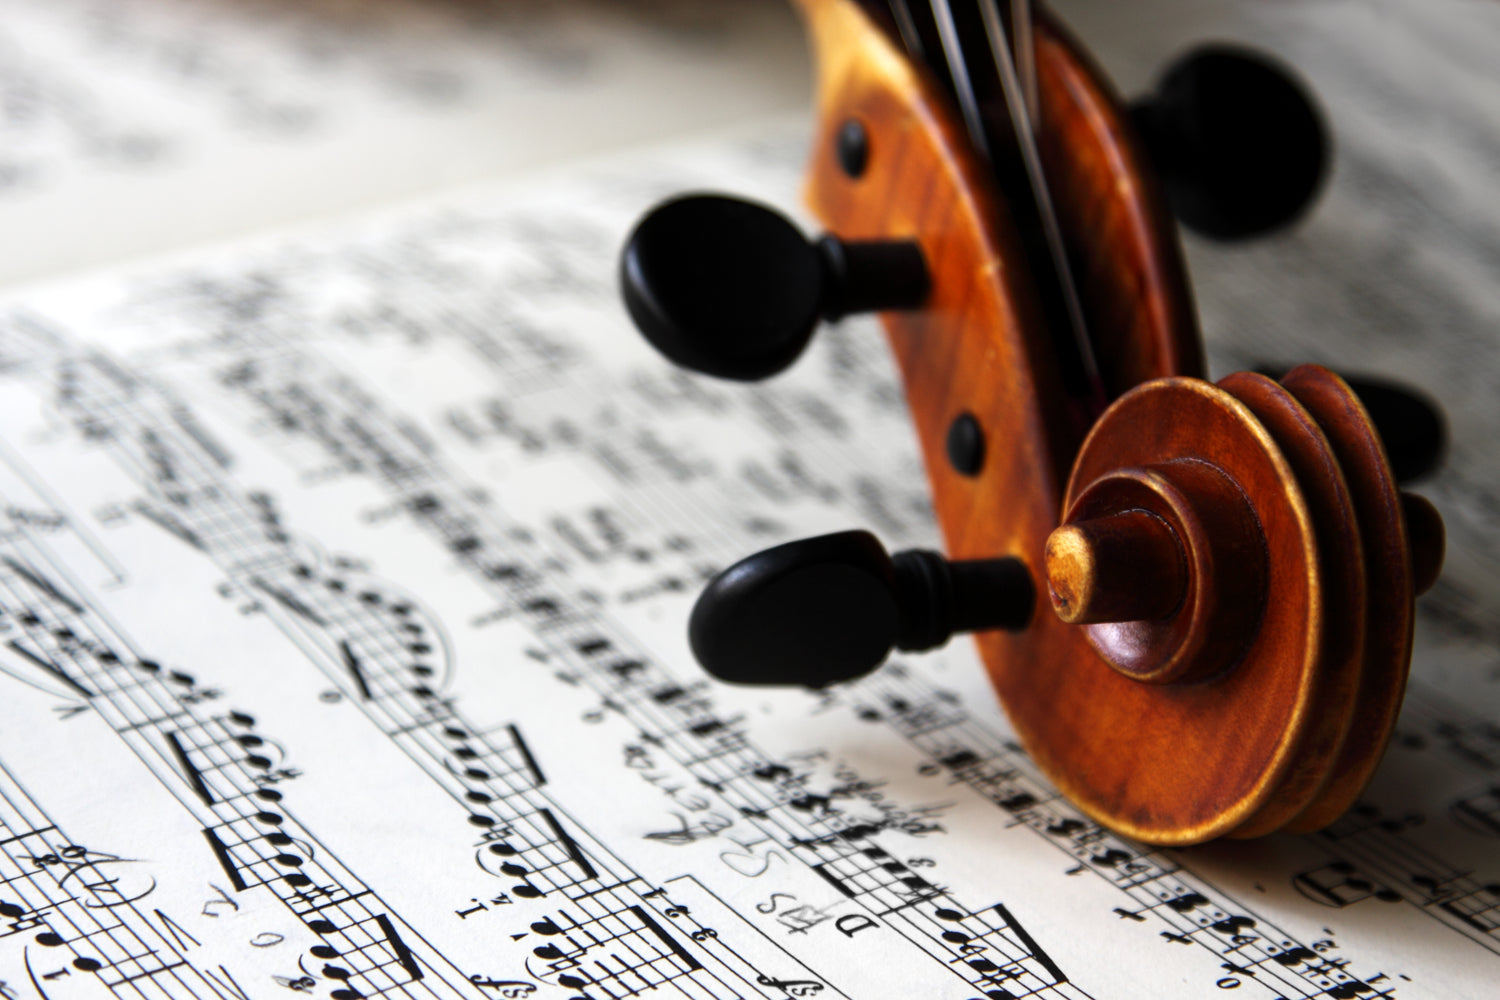 Finding the Best Violin for Beginners